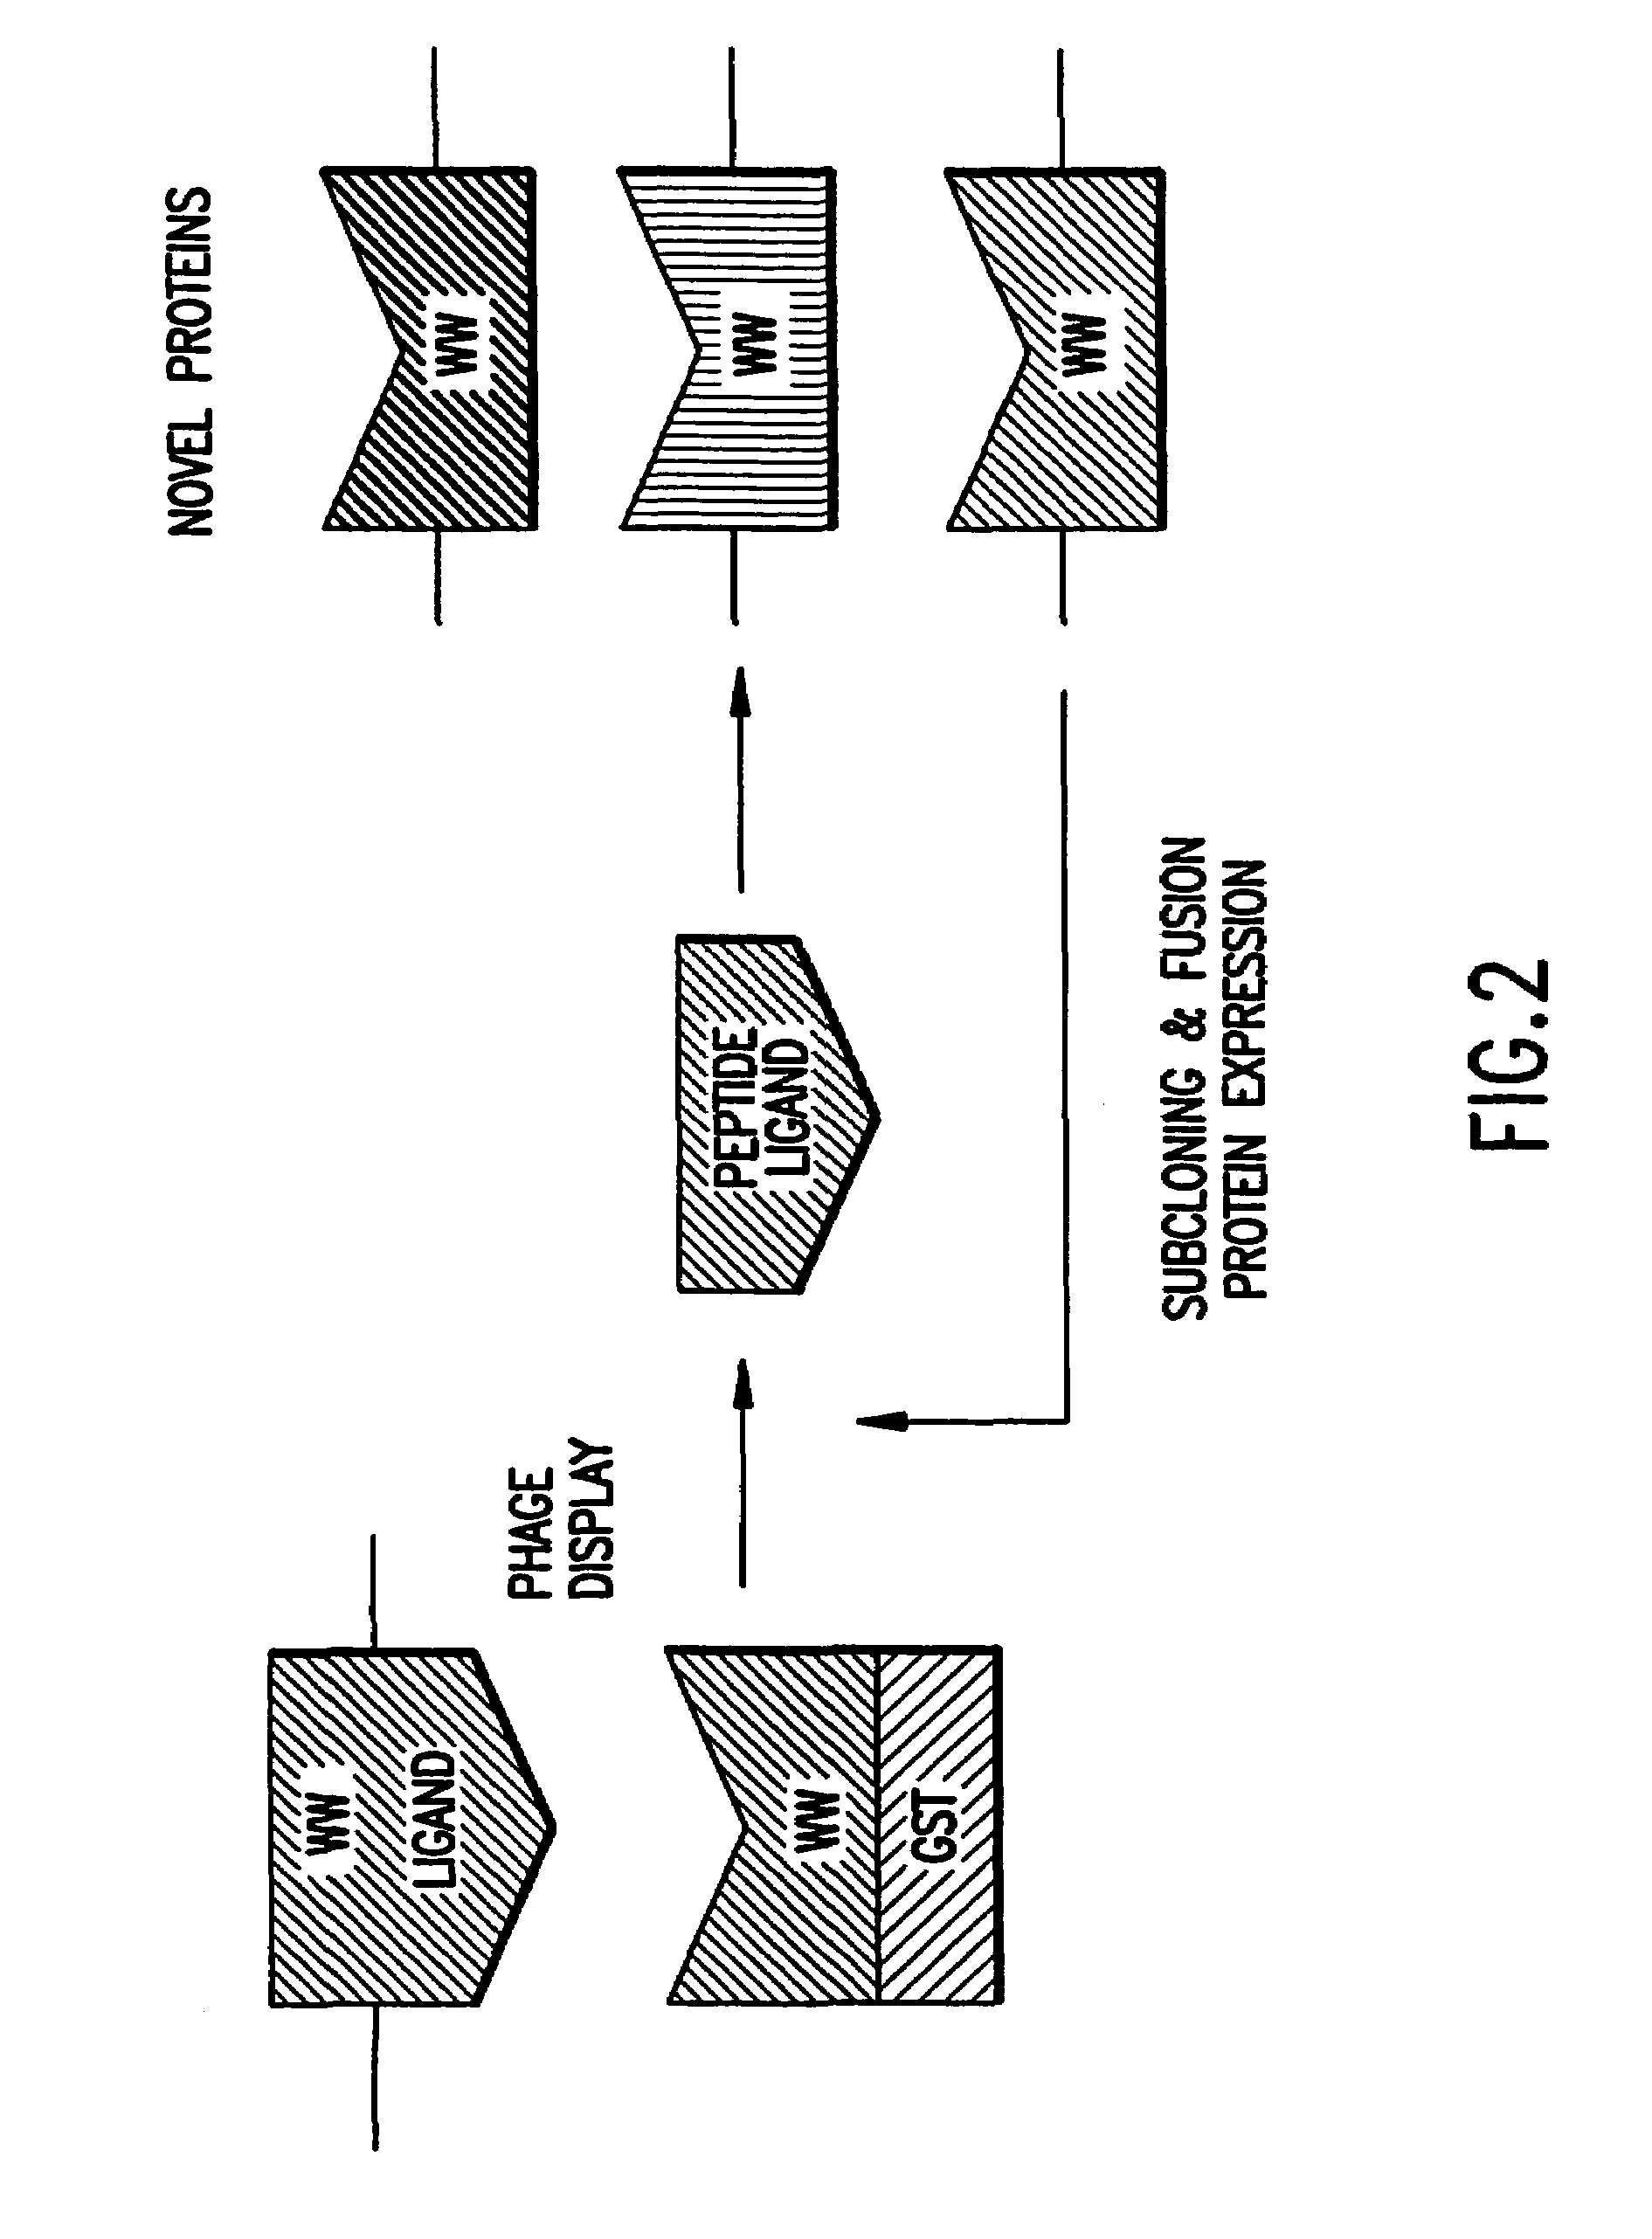 Identification and isolation of novel polypeptides having WW domains and methods of using same